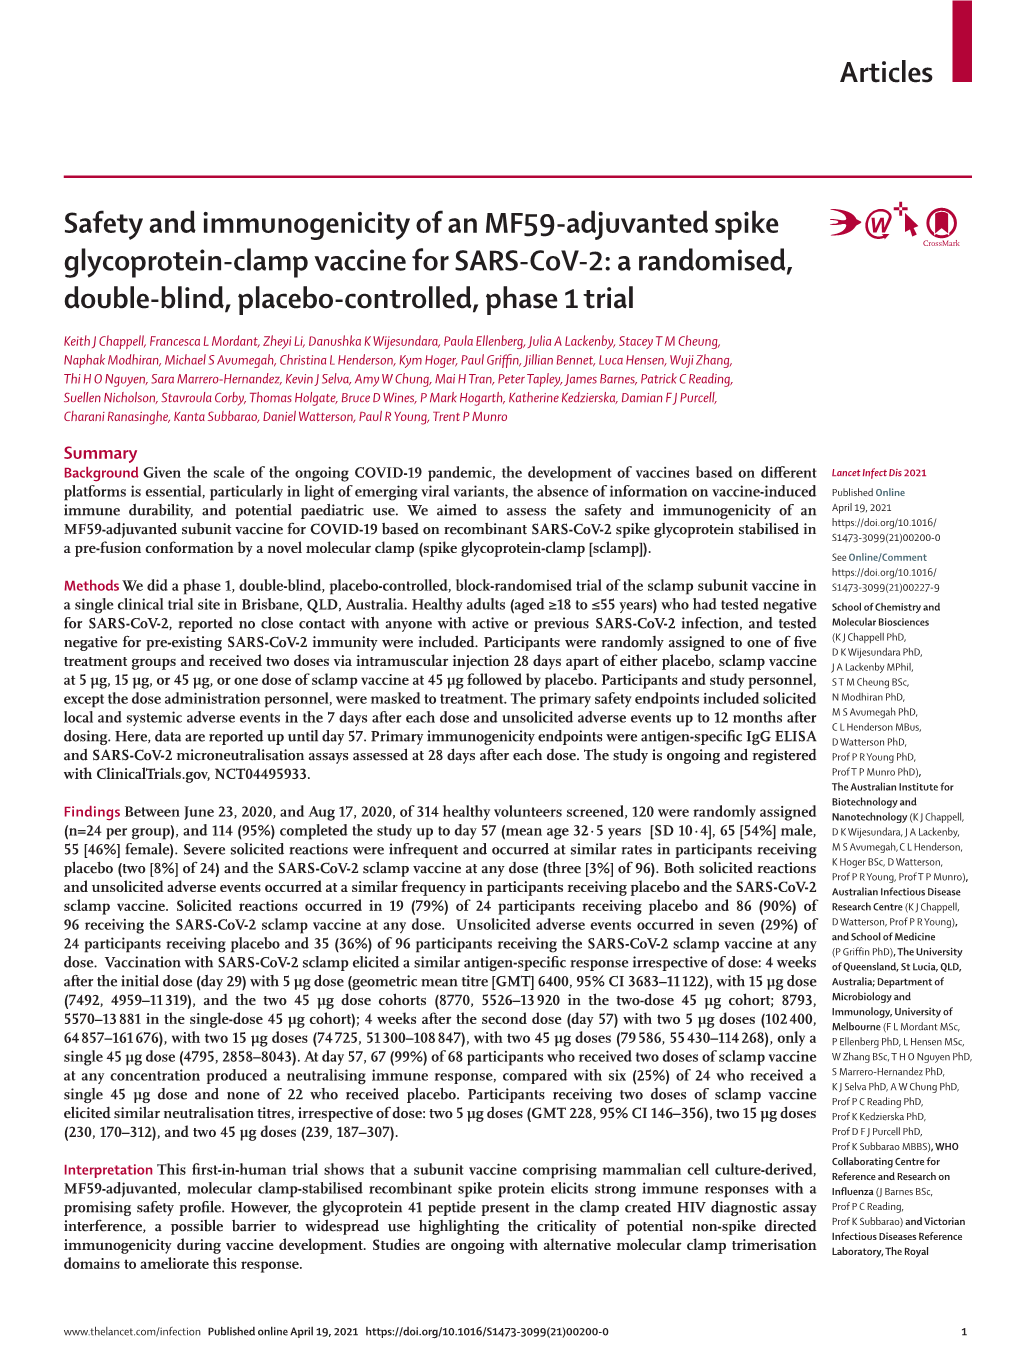 Safety and Immunogenicity of an MF59-Adjuvanted Spike Glycoprotein-Clamp Vaccine for SARS-Cov-2: a Randomised, Double-Blind, Placebo-Controlled, Phase 1 Trial